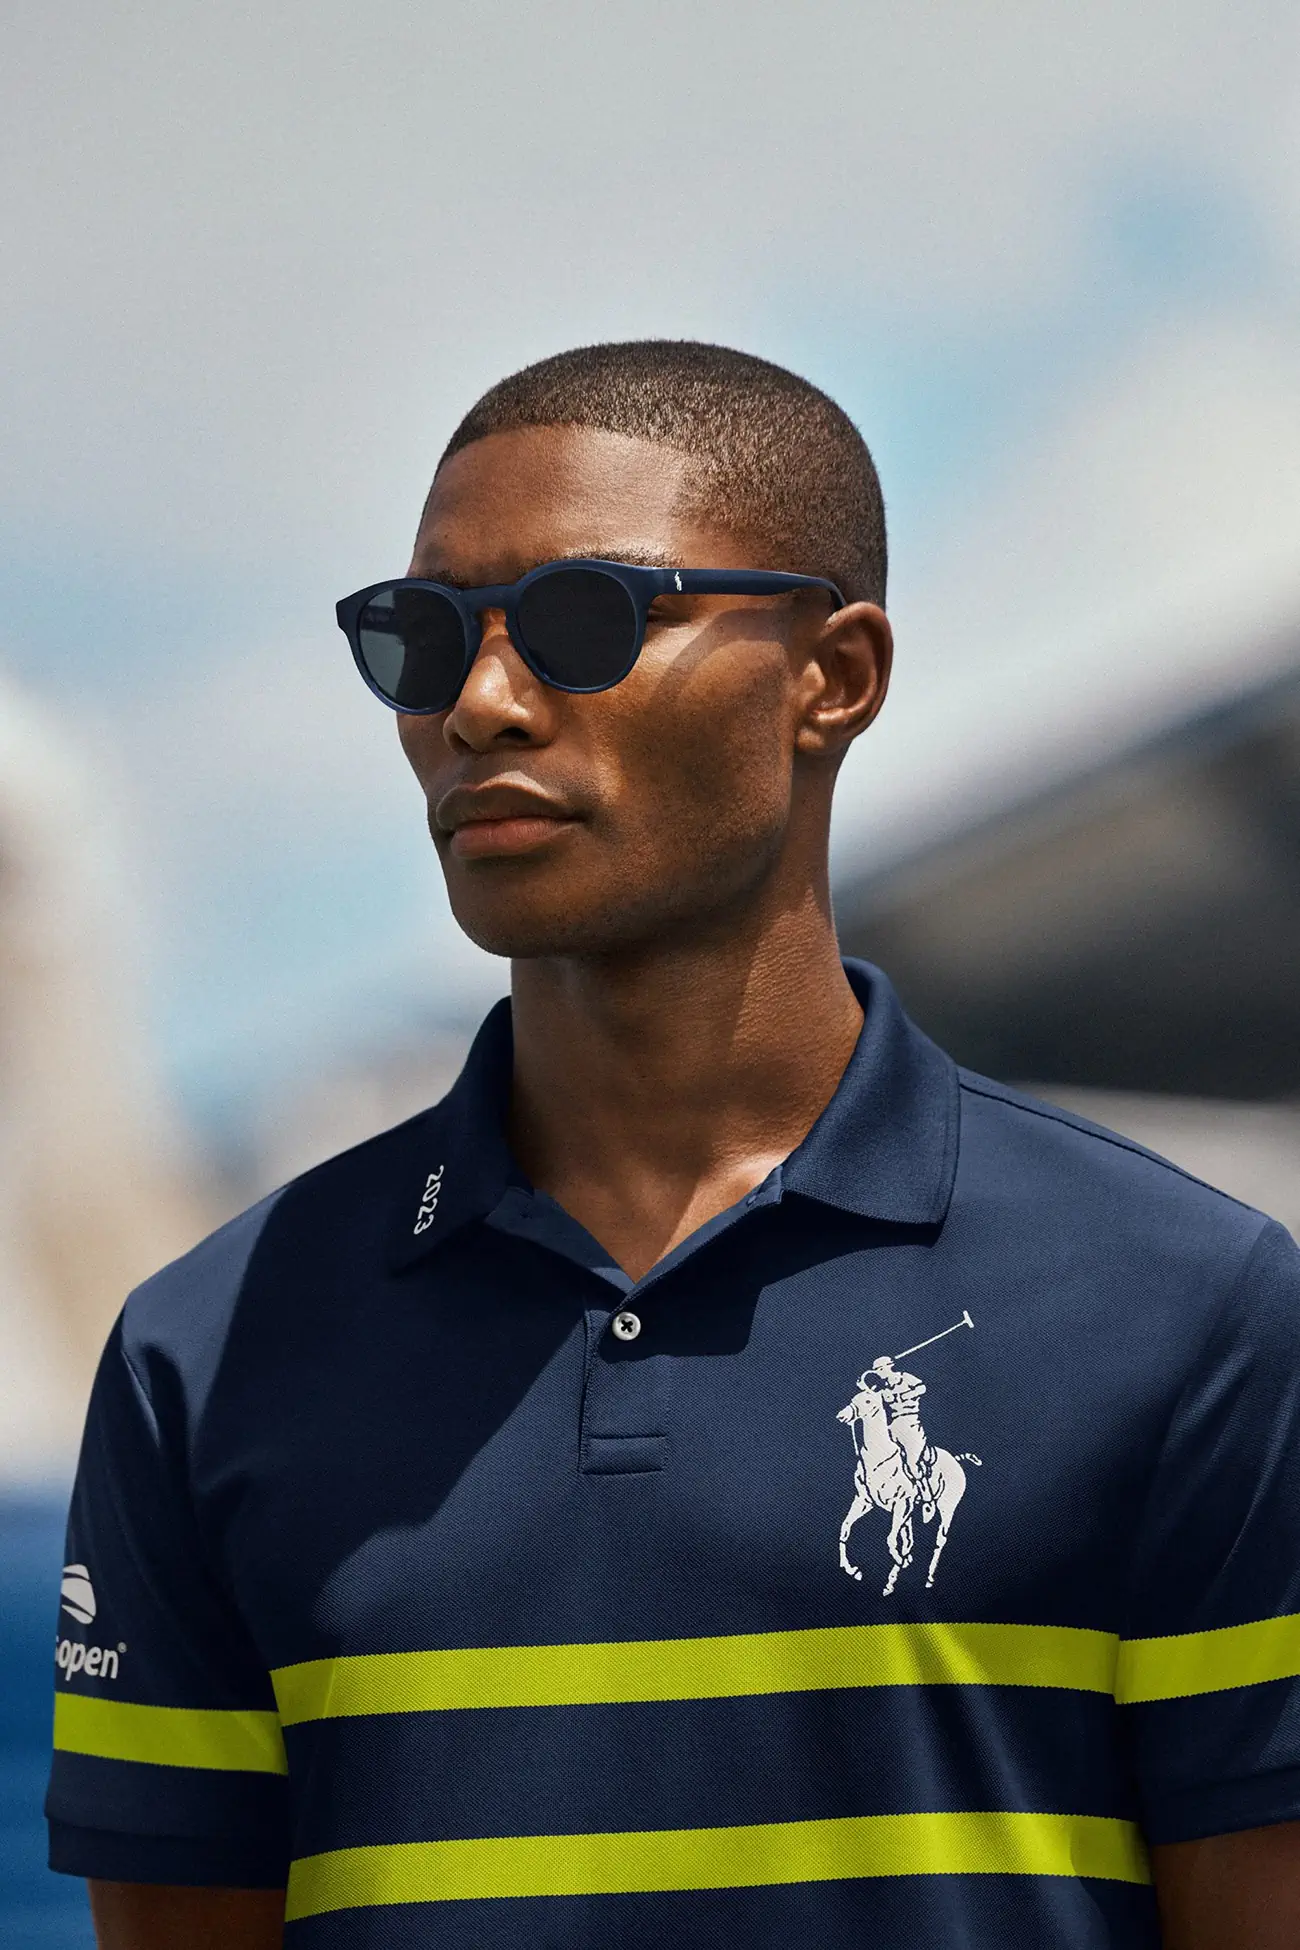 Ralph Lauren takes the 2023 US Open by storm with vintage vibes and sustainable strides